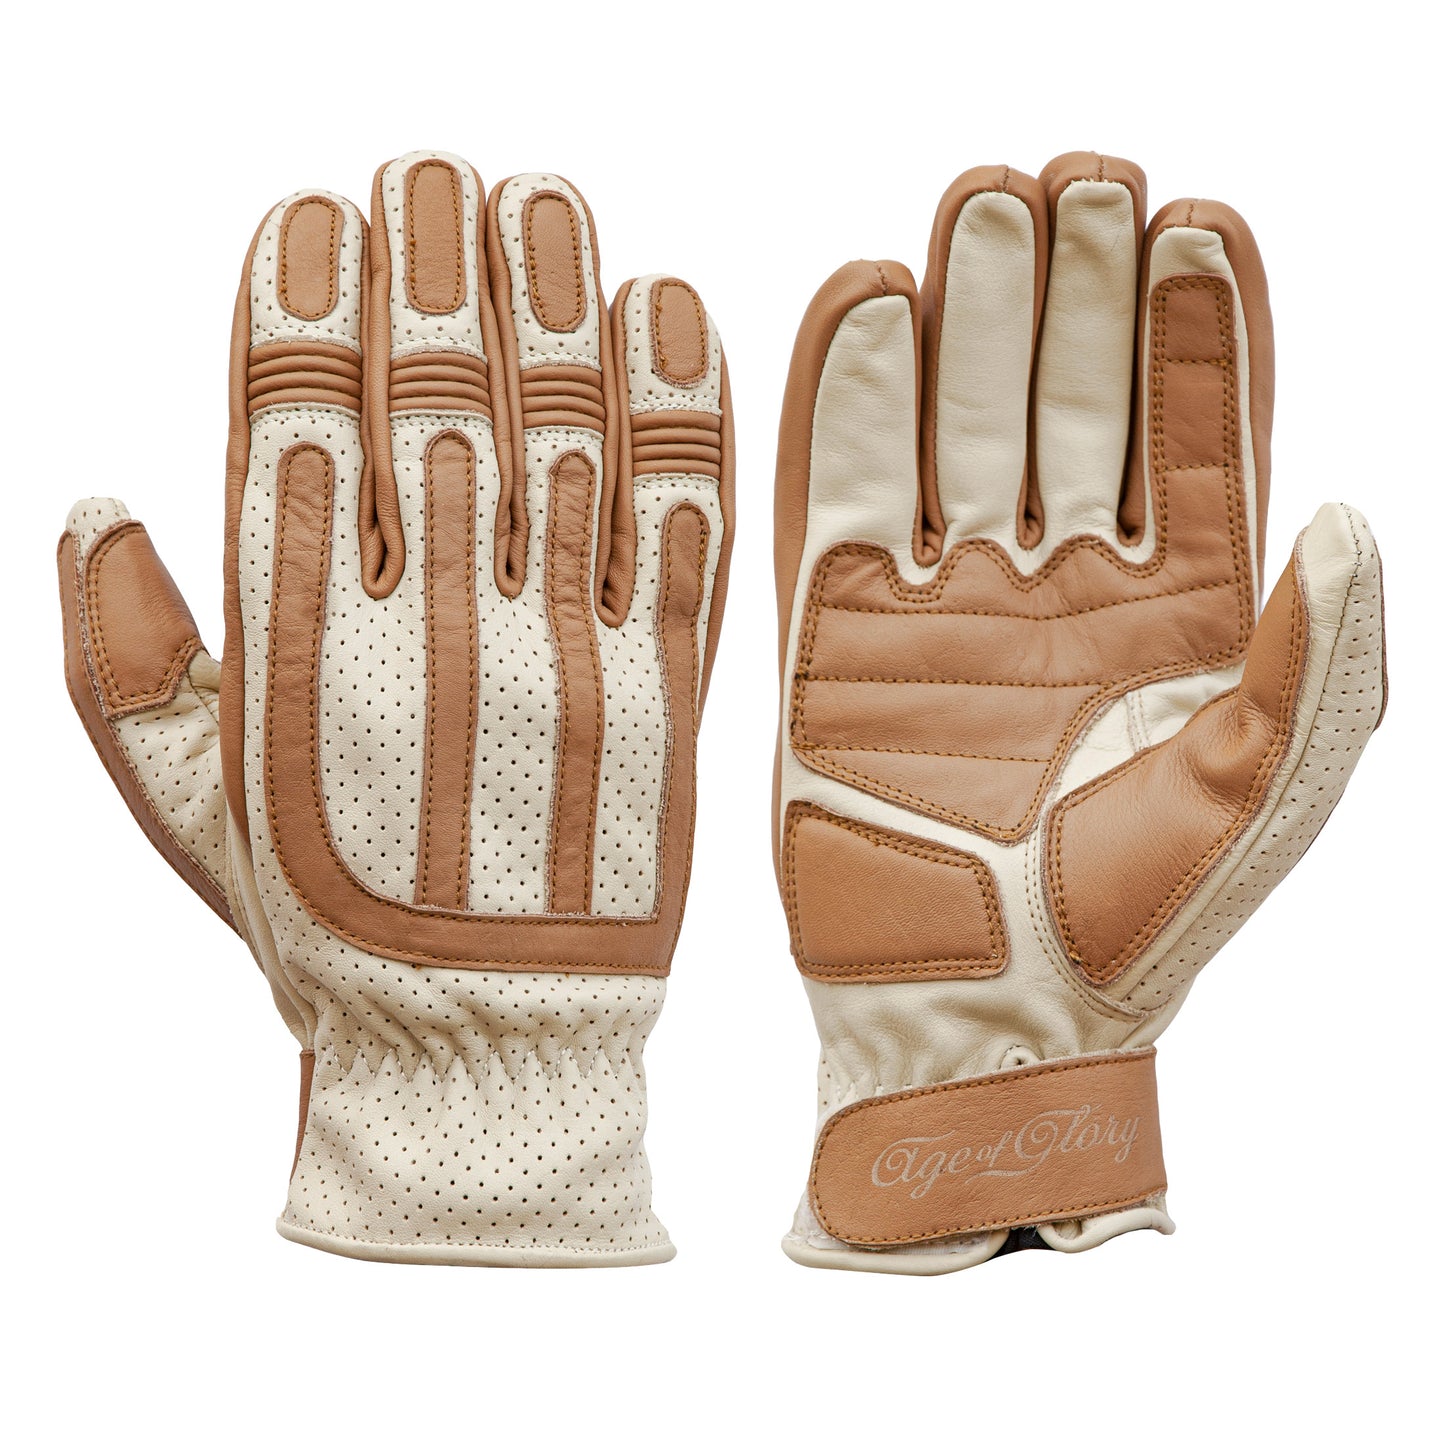 Age of Glory- Victory Leather CE Gloves Cream / Camel